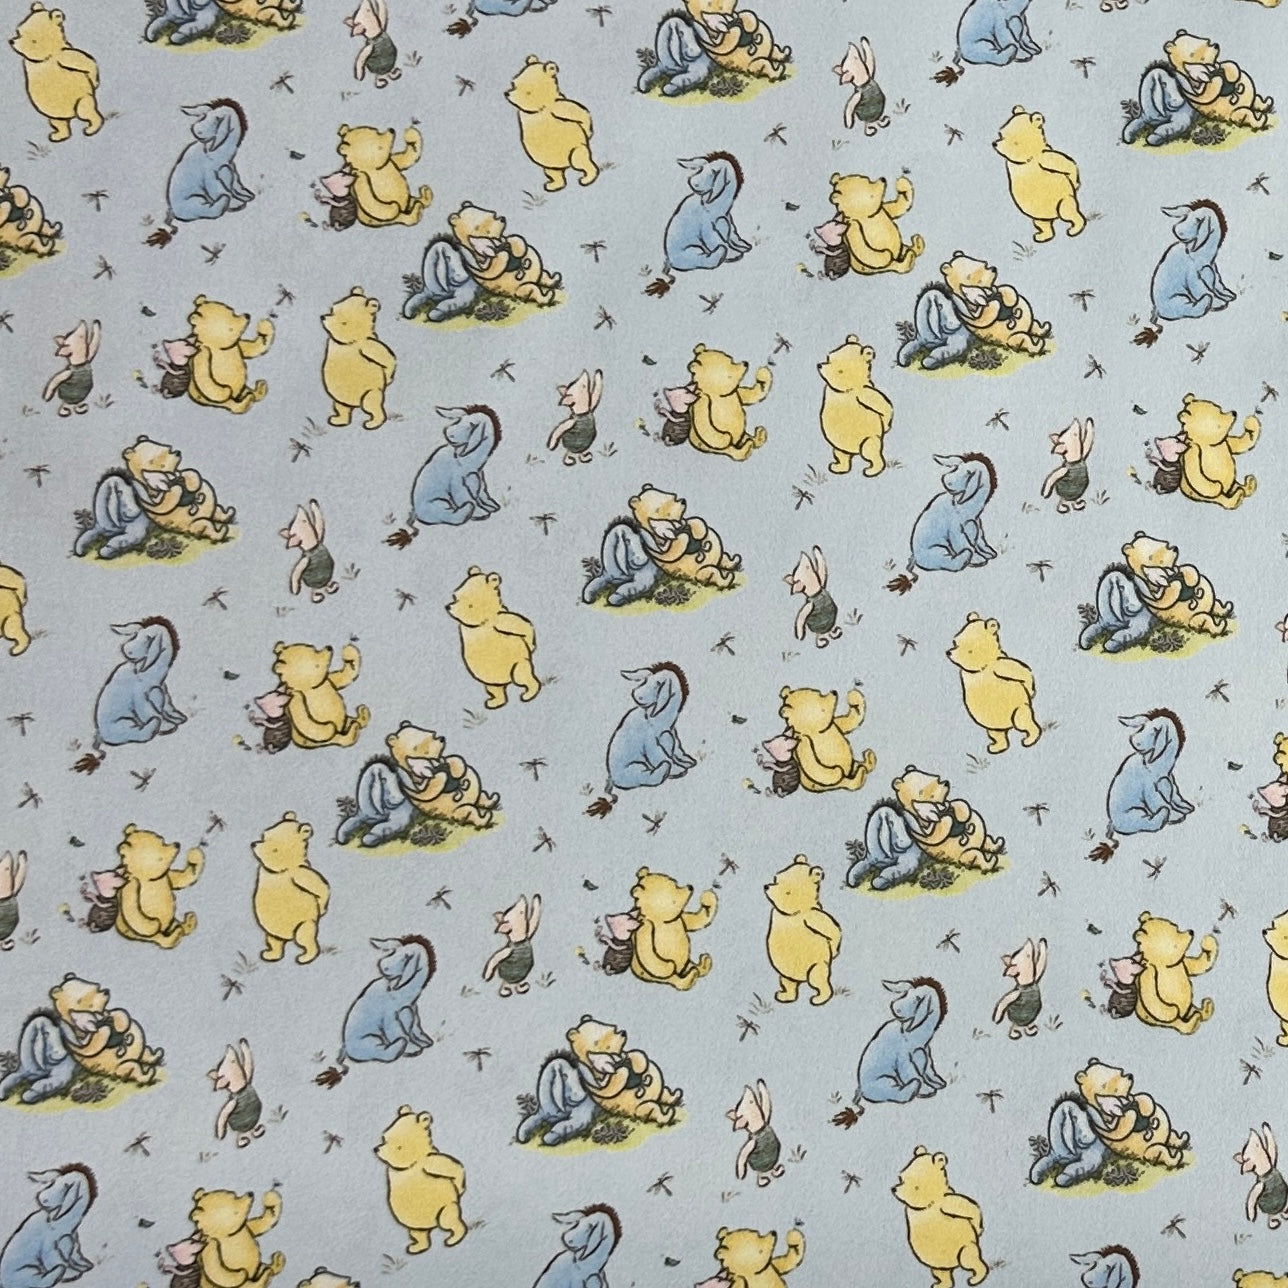 Winnie the Pooh and Friends on Blue 1 mil PUL Fabric - Made in the USA